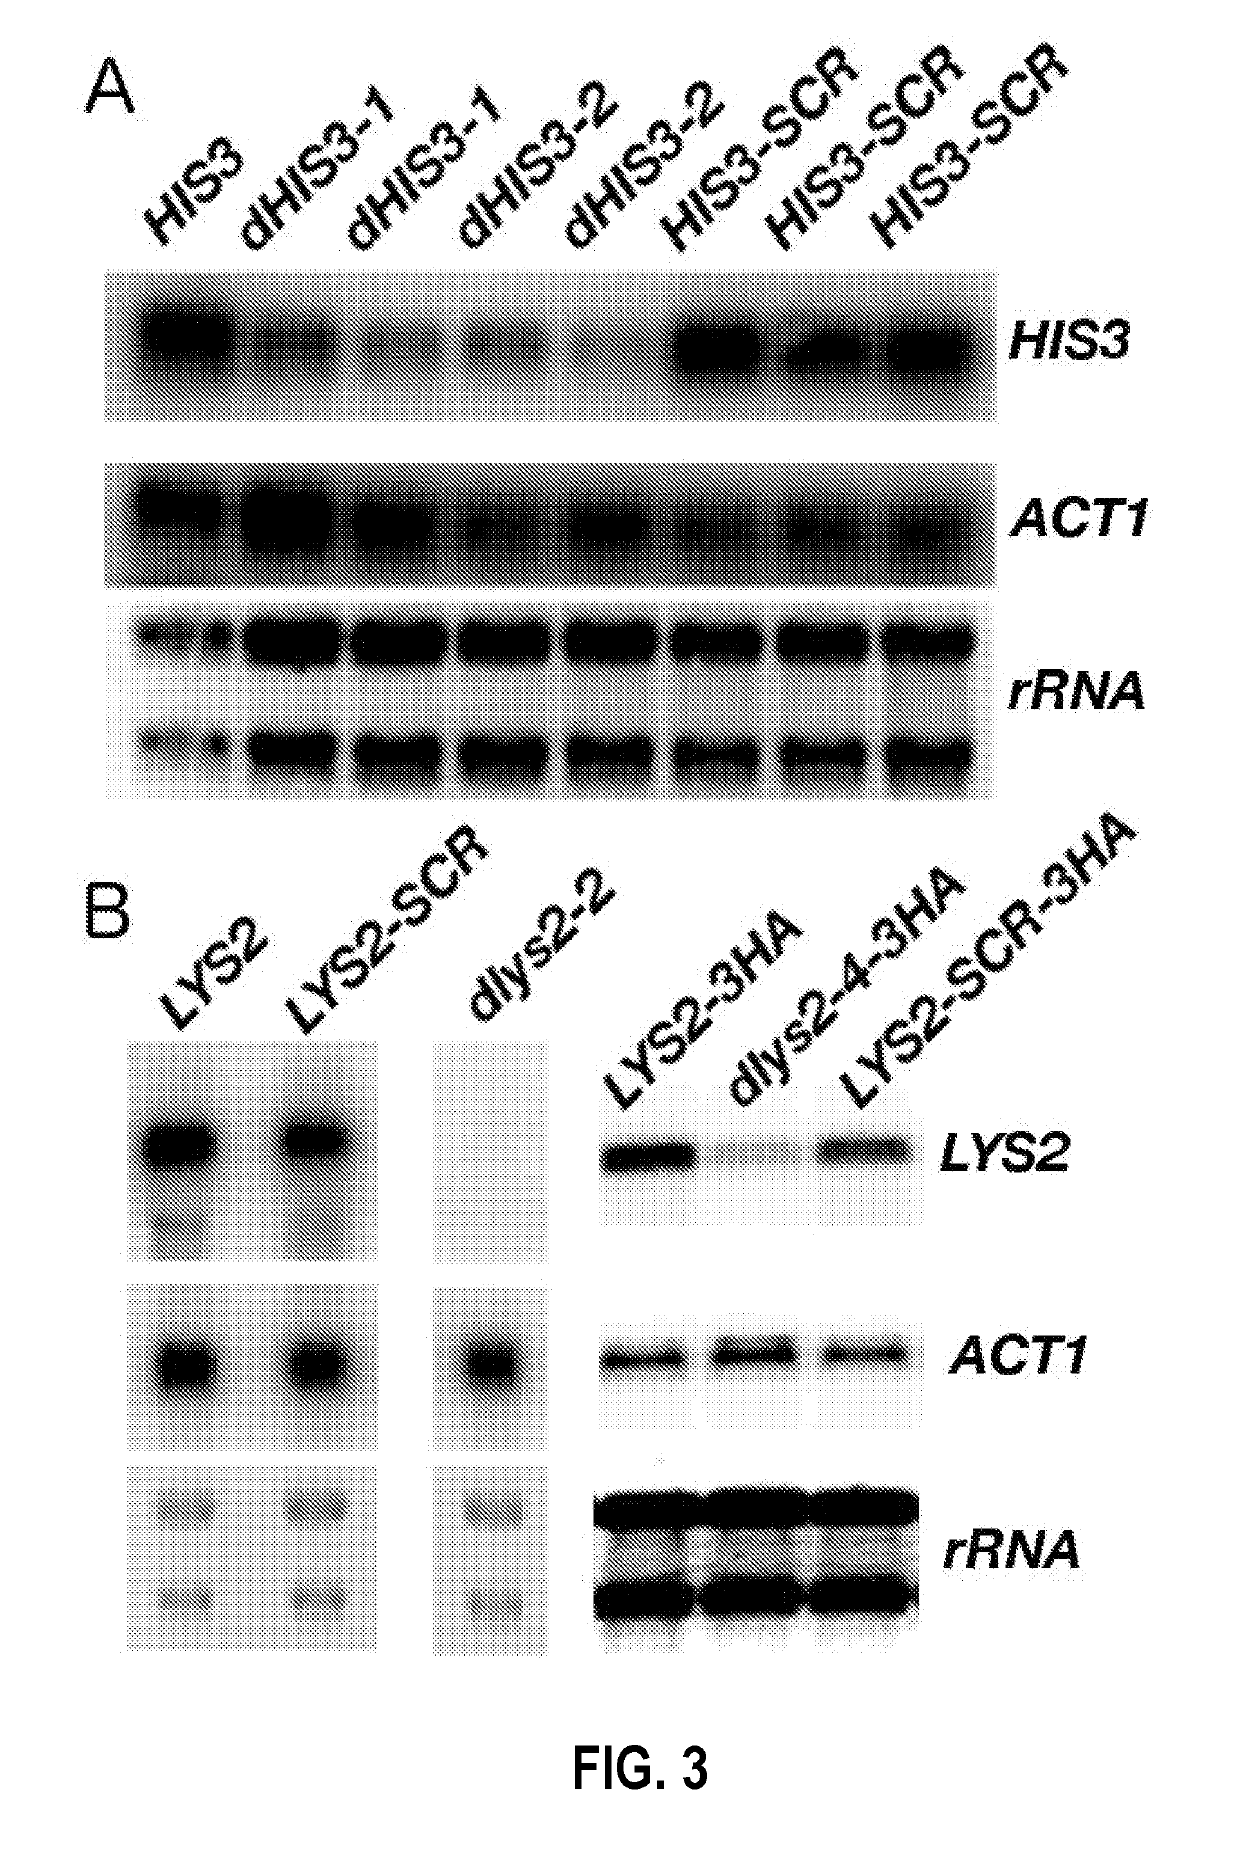 Modified protein encoding sequences having increased rare hexamer content